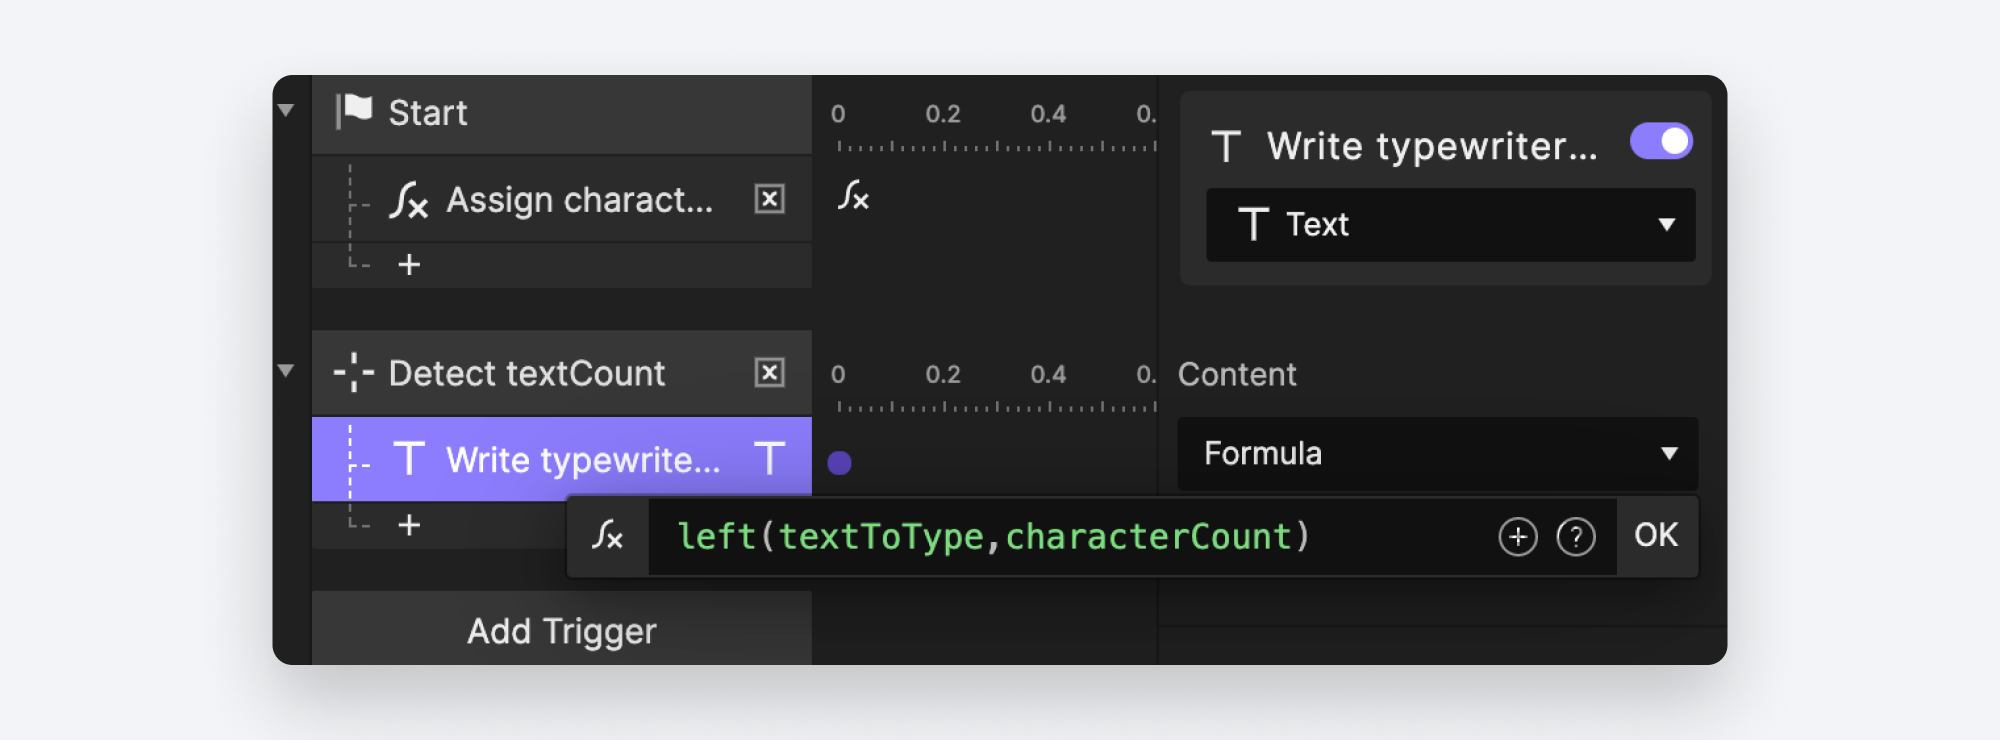 Add a Text response to the Text layer and use formula